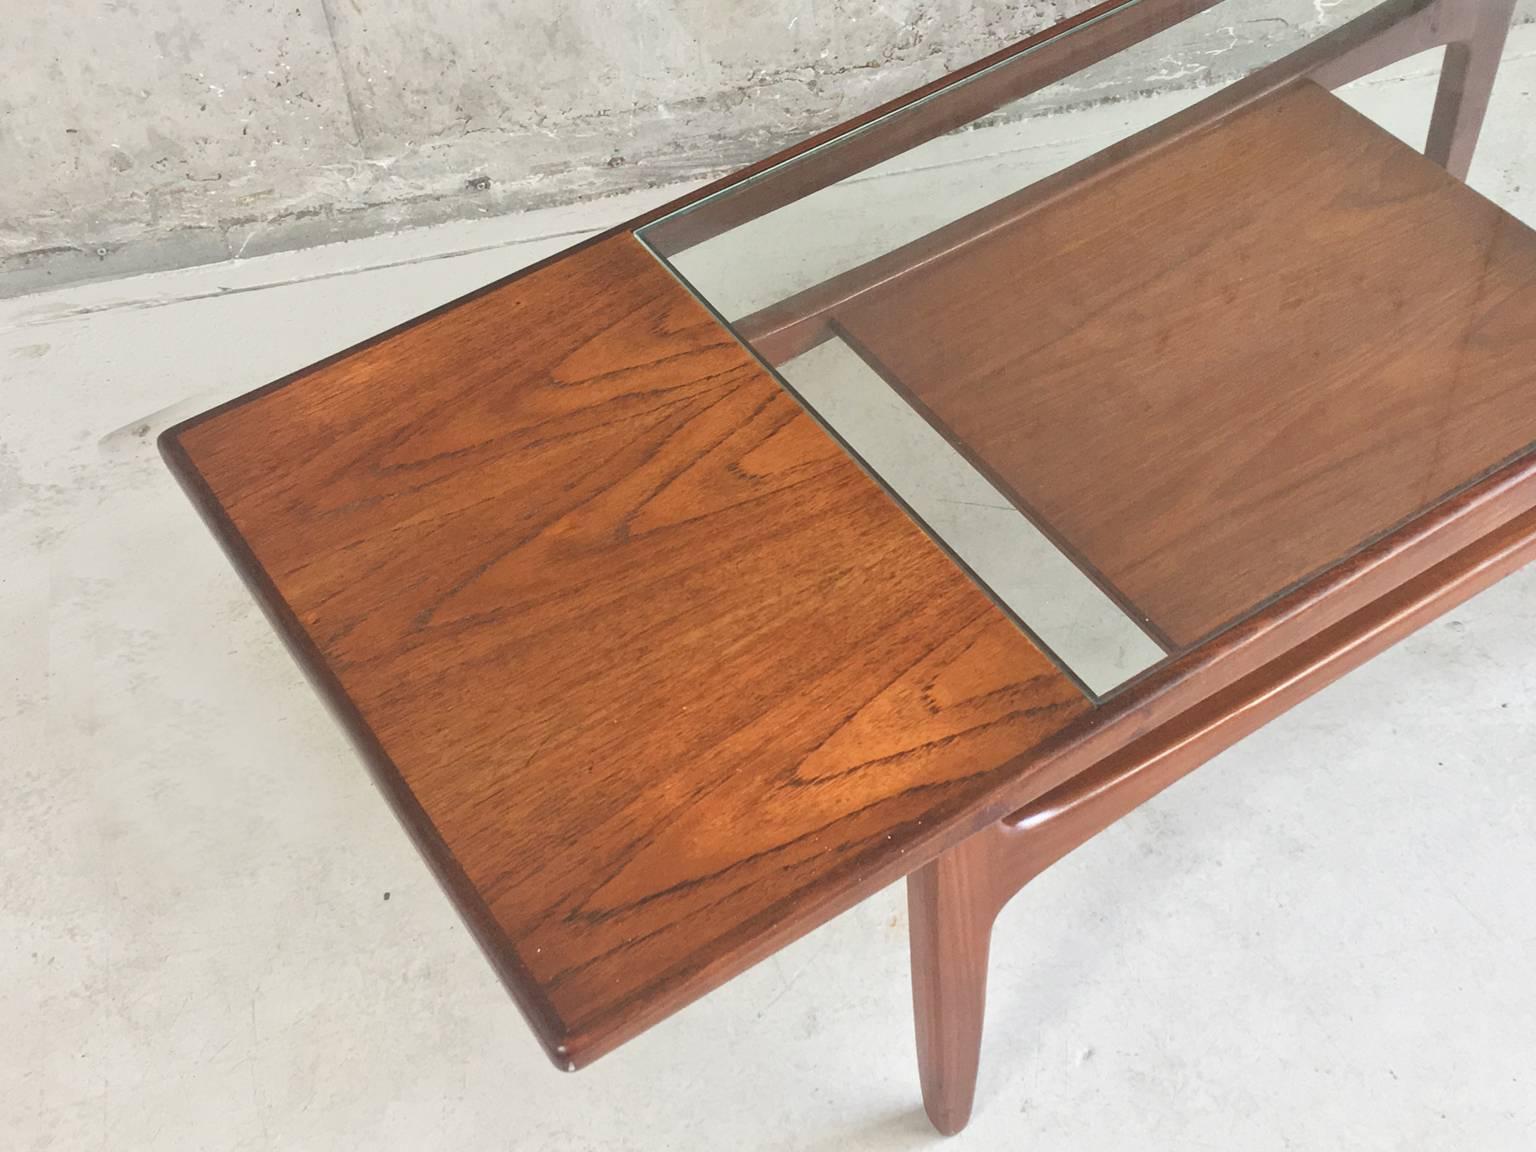 1970s G Plan Mid-Century Modern Teak Coffee Table with Glass Inset In Excellent Condition For Sale In London, GB